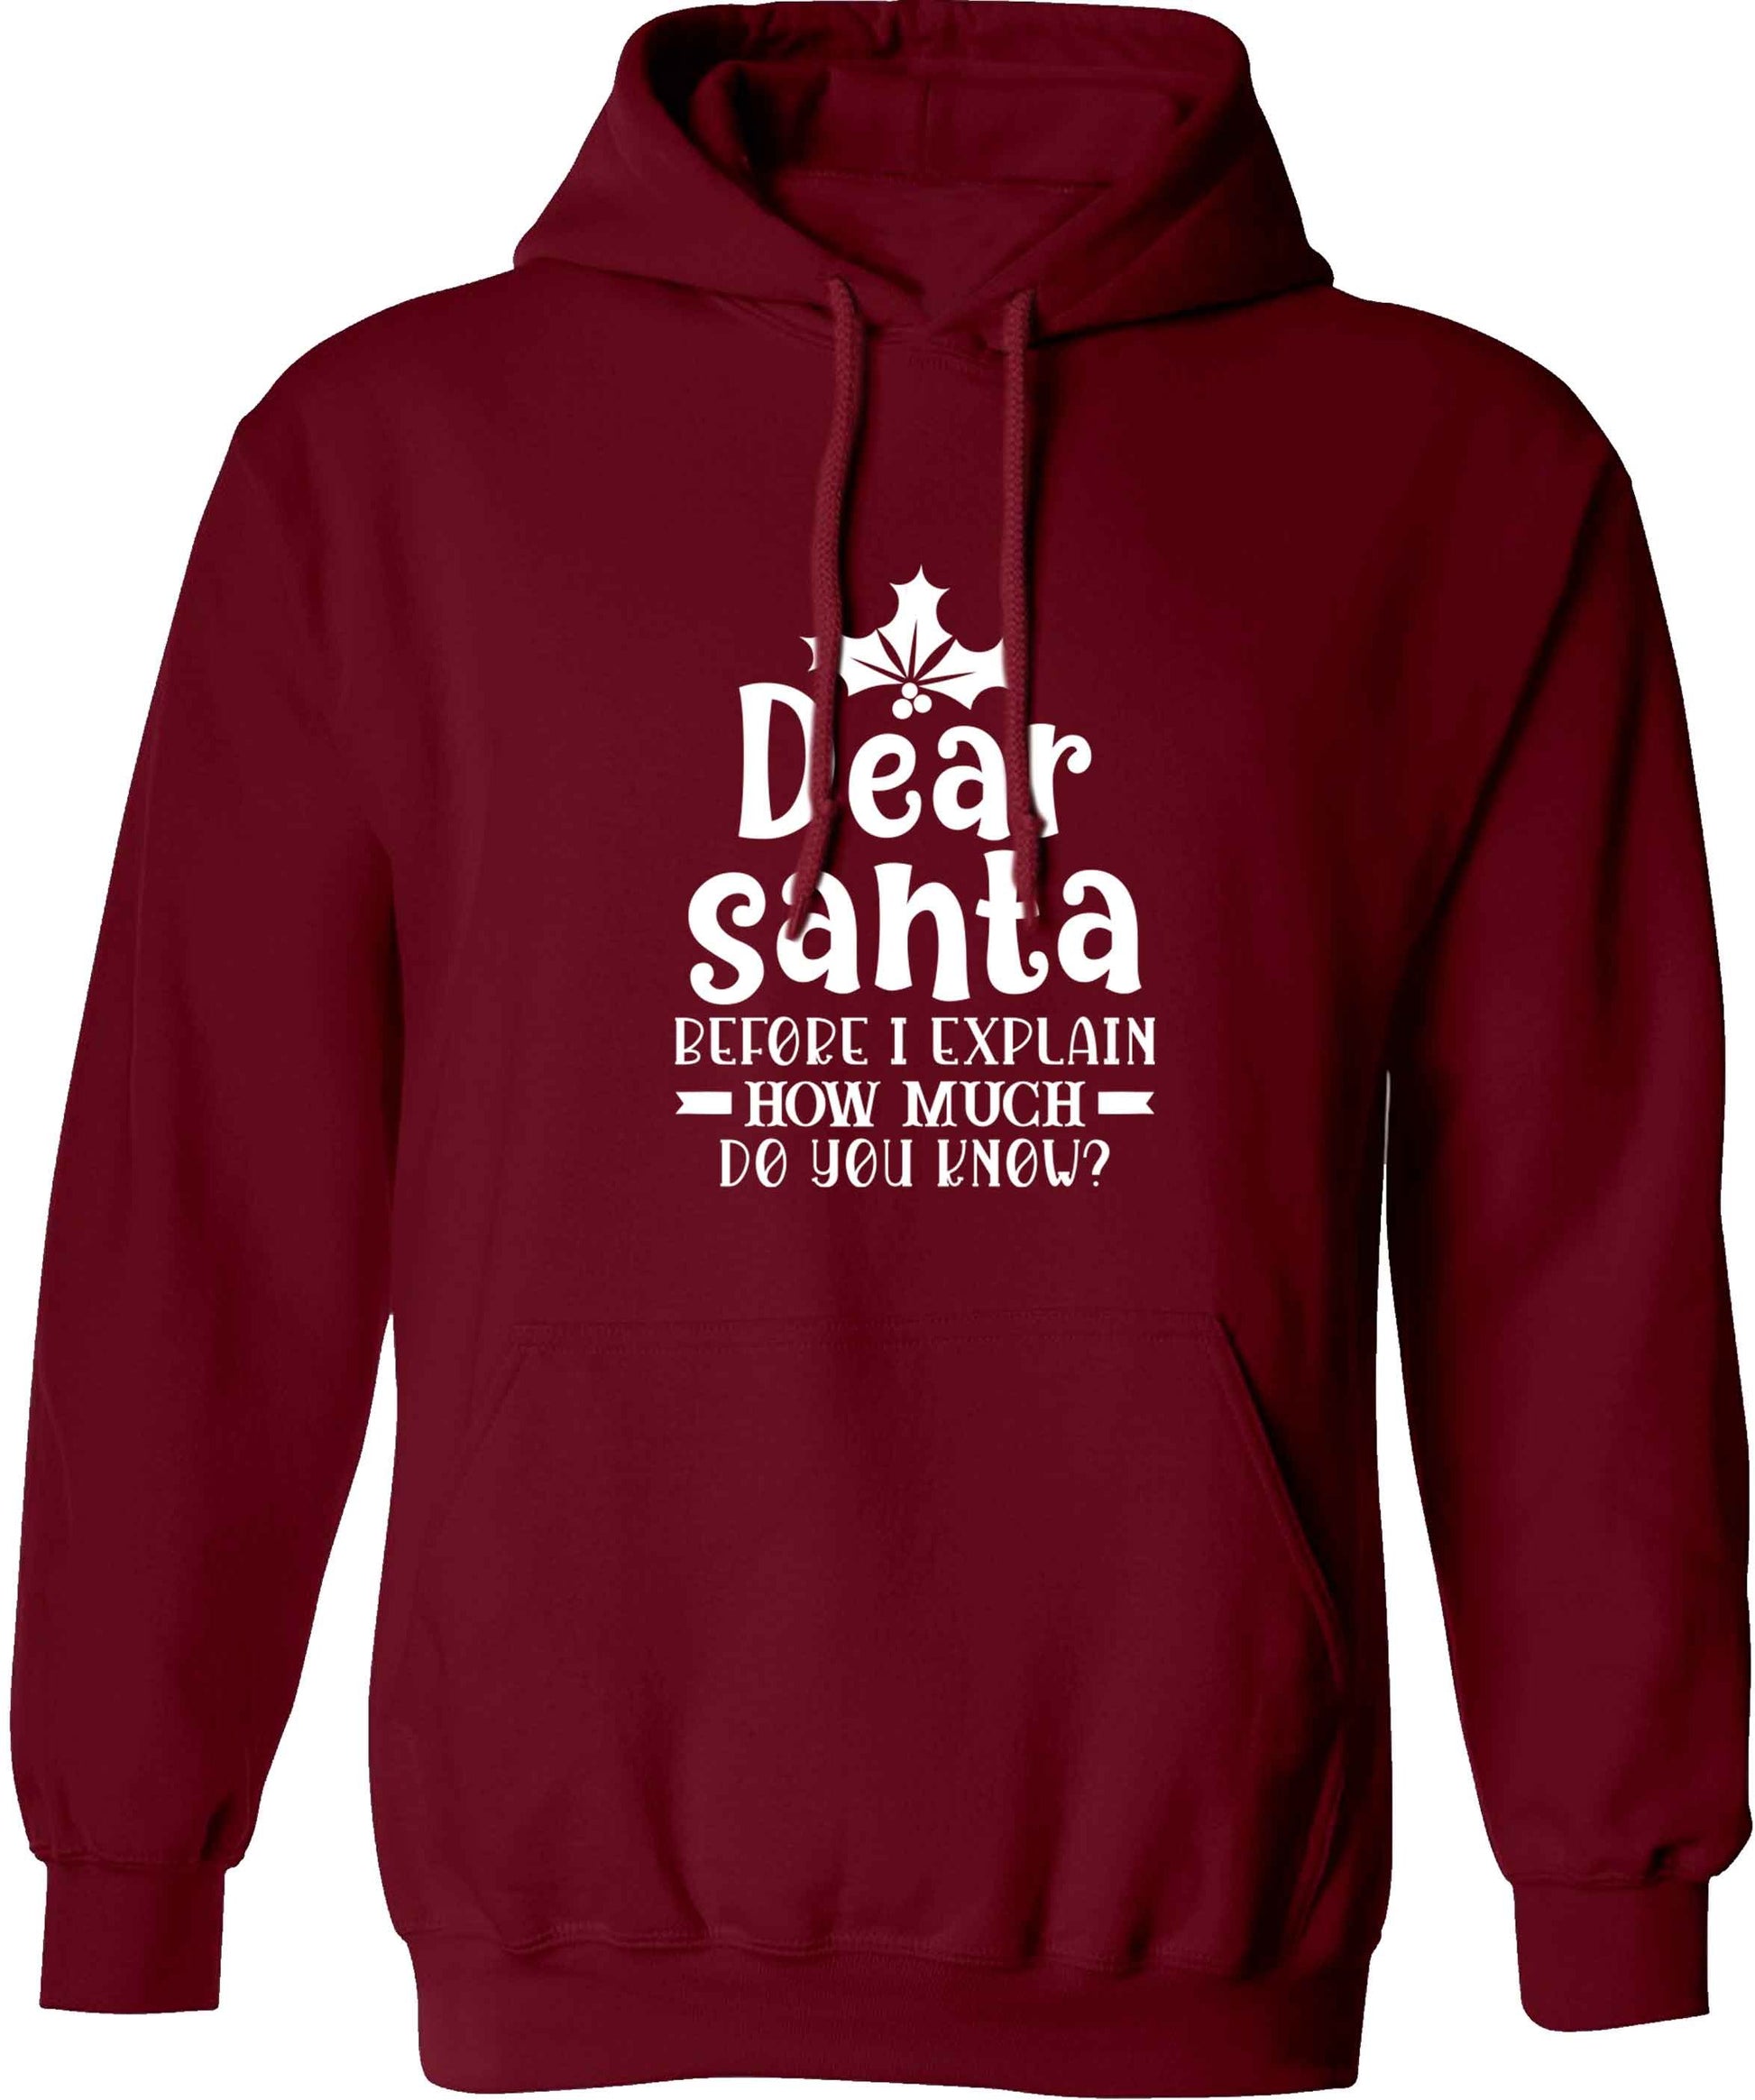 Santa before I explain how much do you know? adults unisex maroon hoodie 2XL